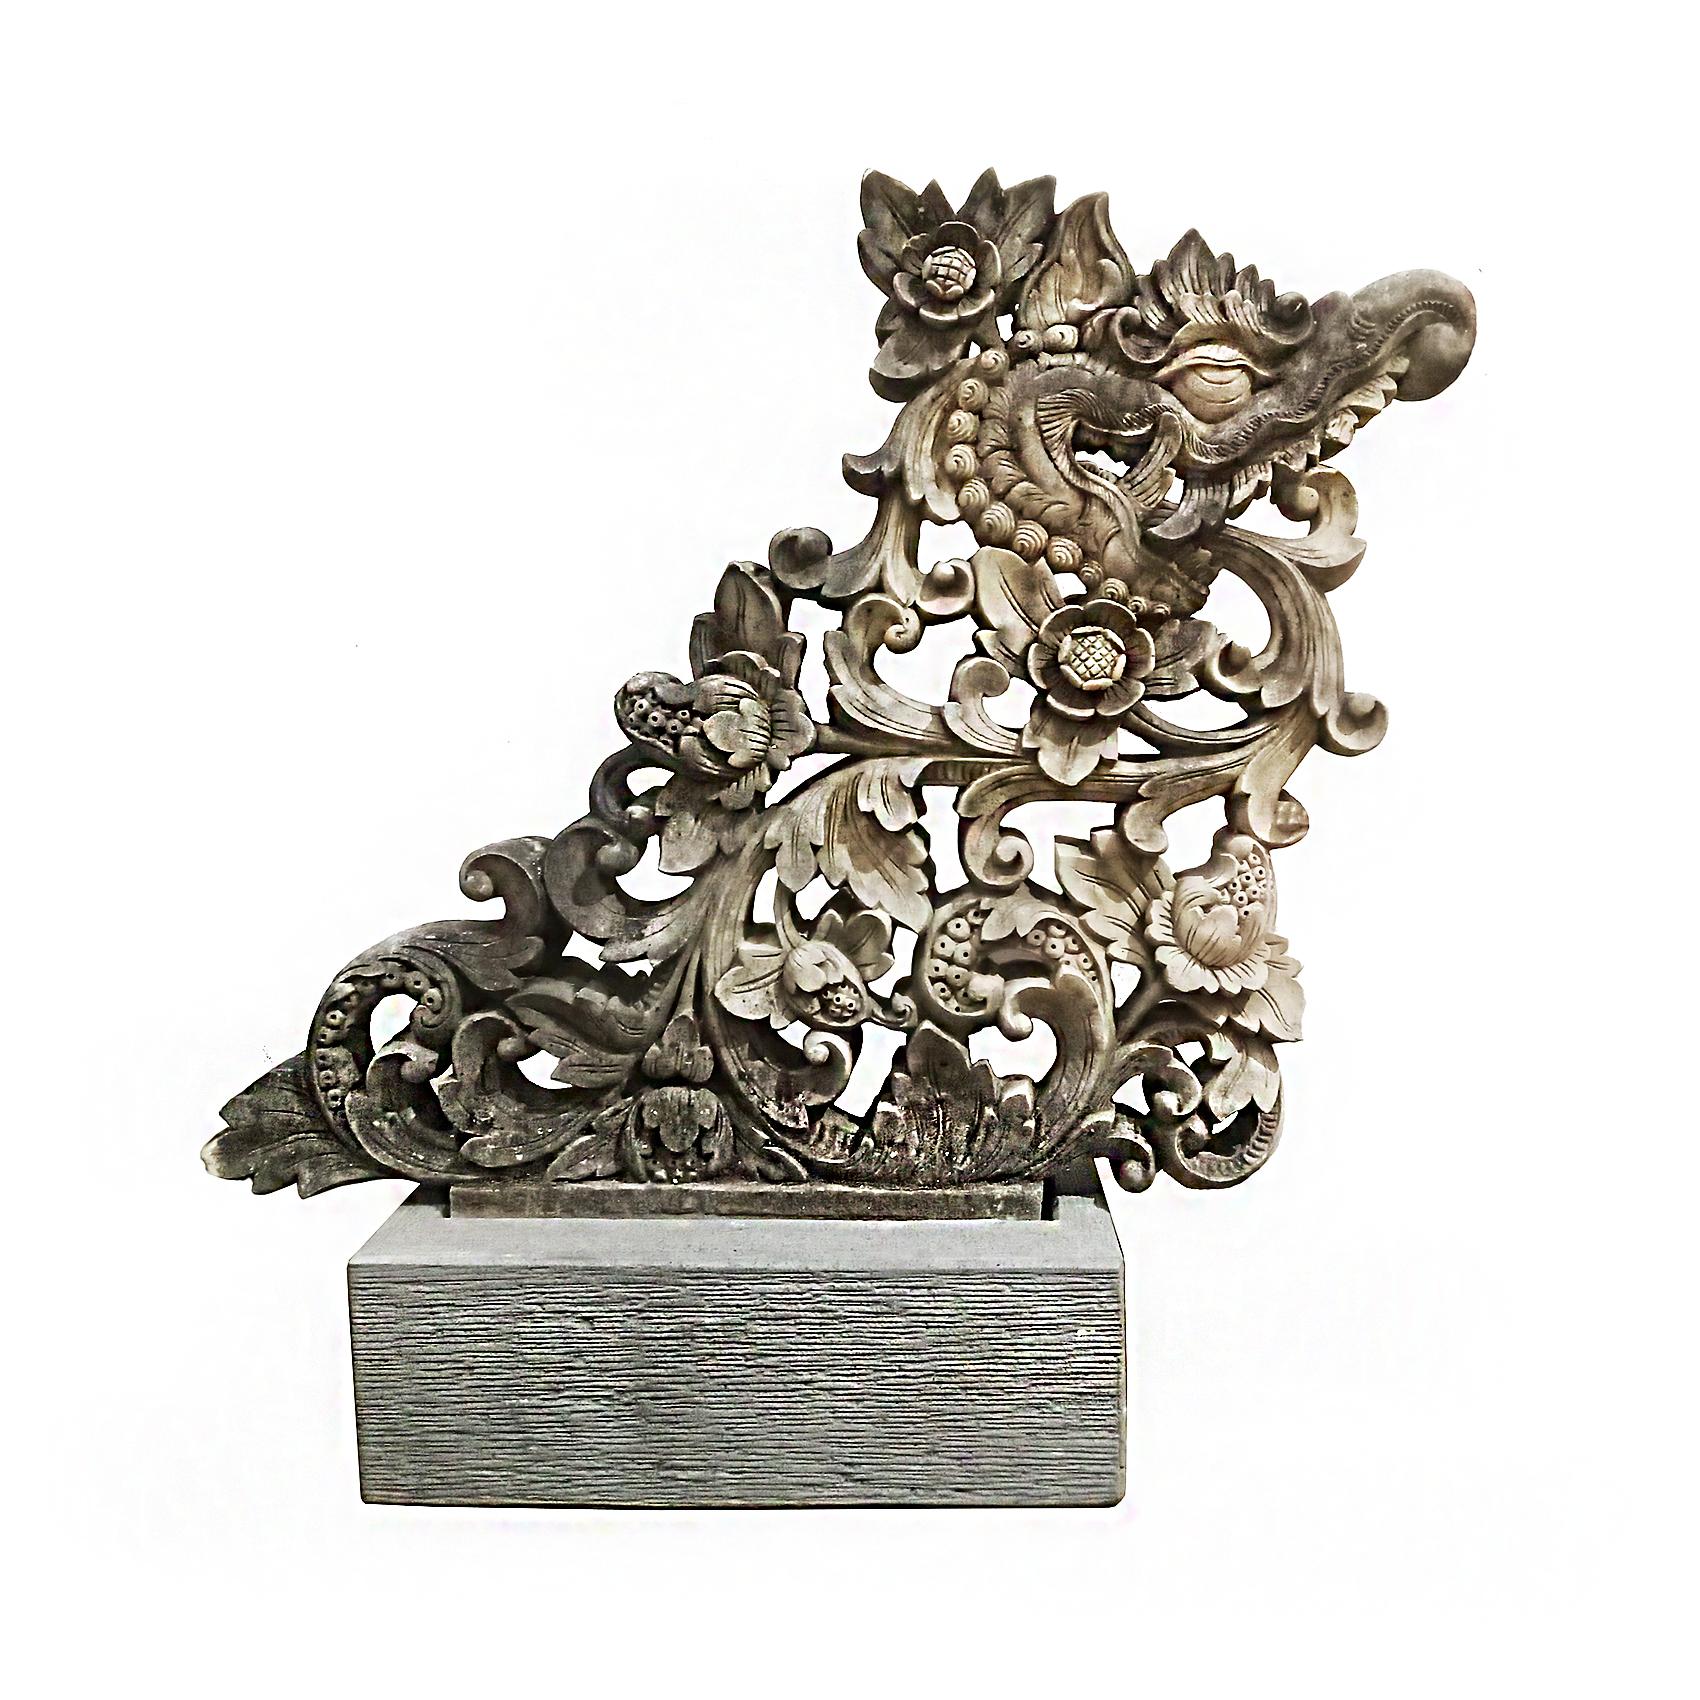 A superb stone sculpture of a dragon and flowers. Indonesia, early 20th Century. 

Reclaimed from an old building, this exquisite carving was an architectural detail that reflects the old traditions of Asian sculpture. With intricate details